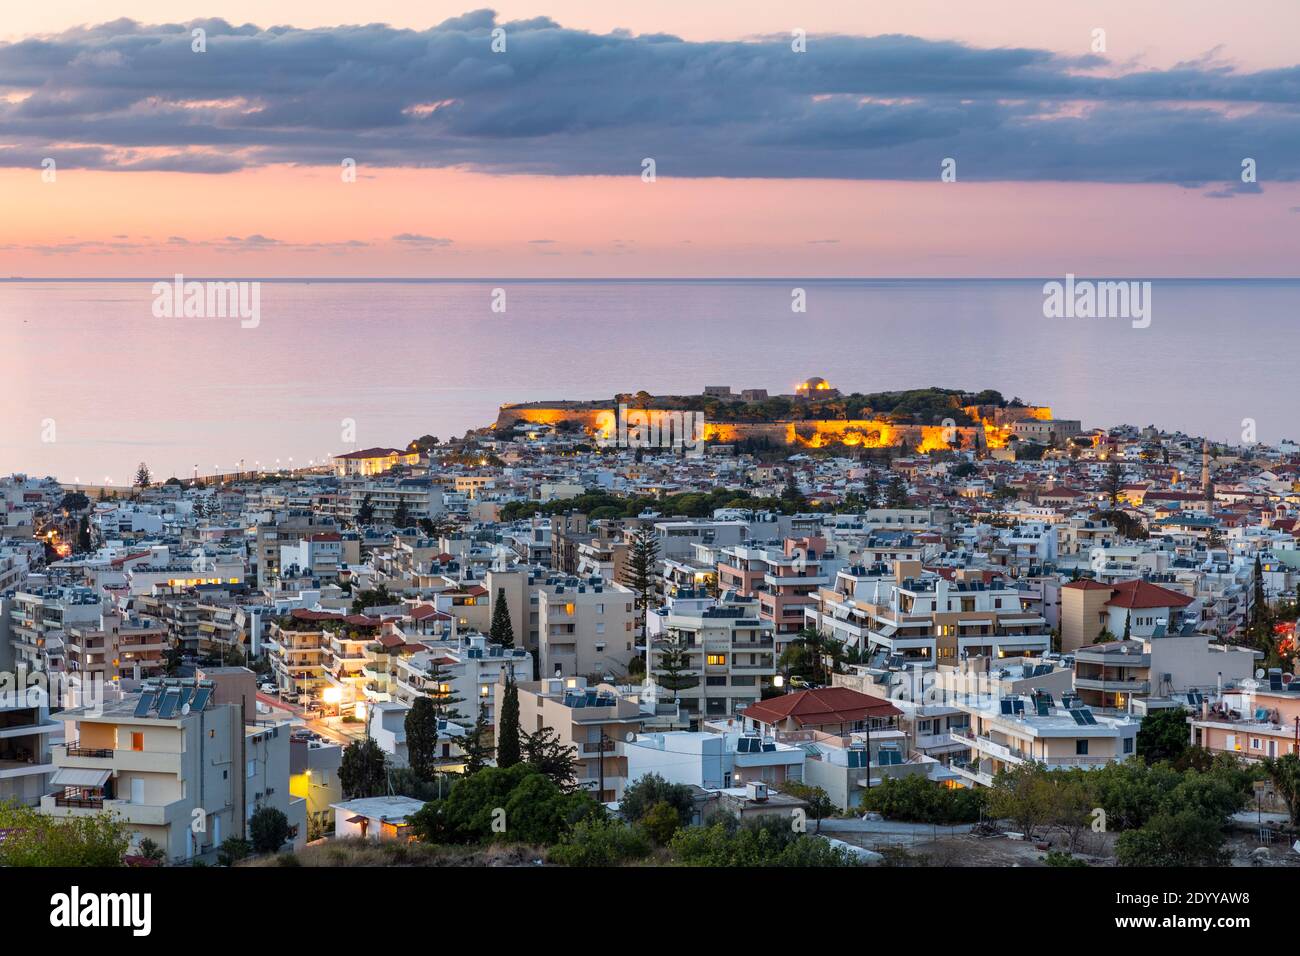 Cityscape view of Rethymno illuminated at twilight, showing the old town, Fortezza Castle, and sea view, Crete, Greece Stock Photo